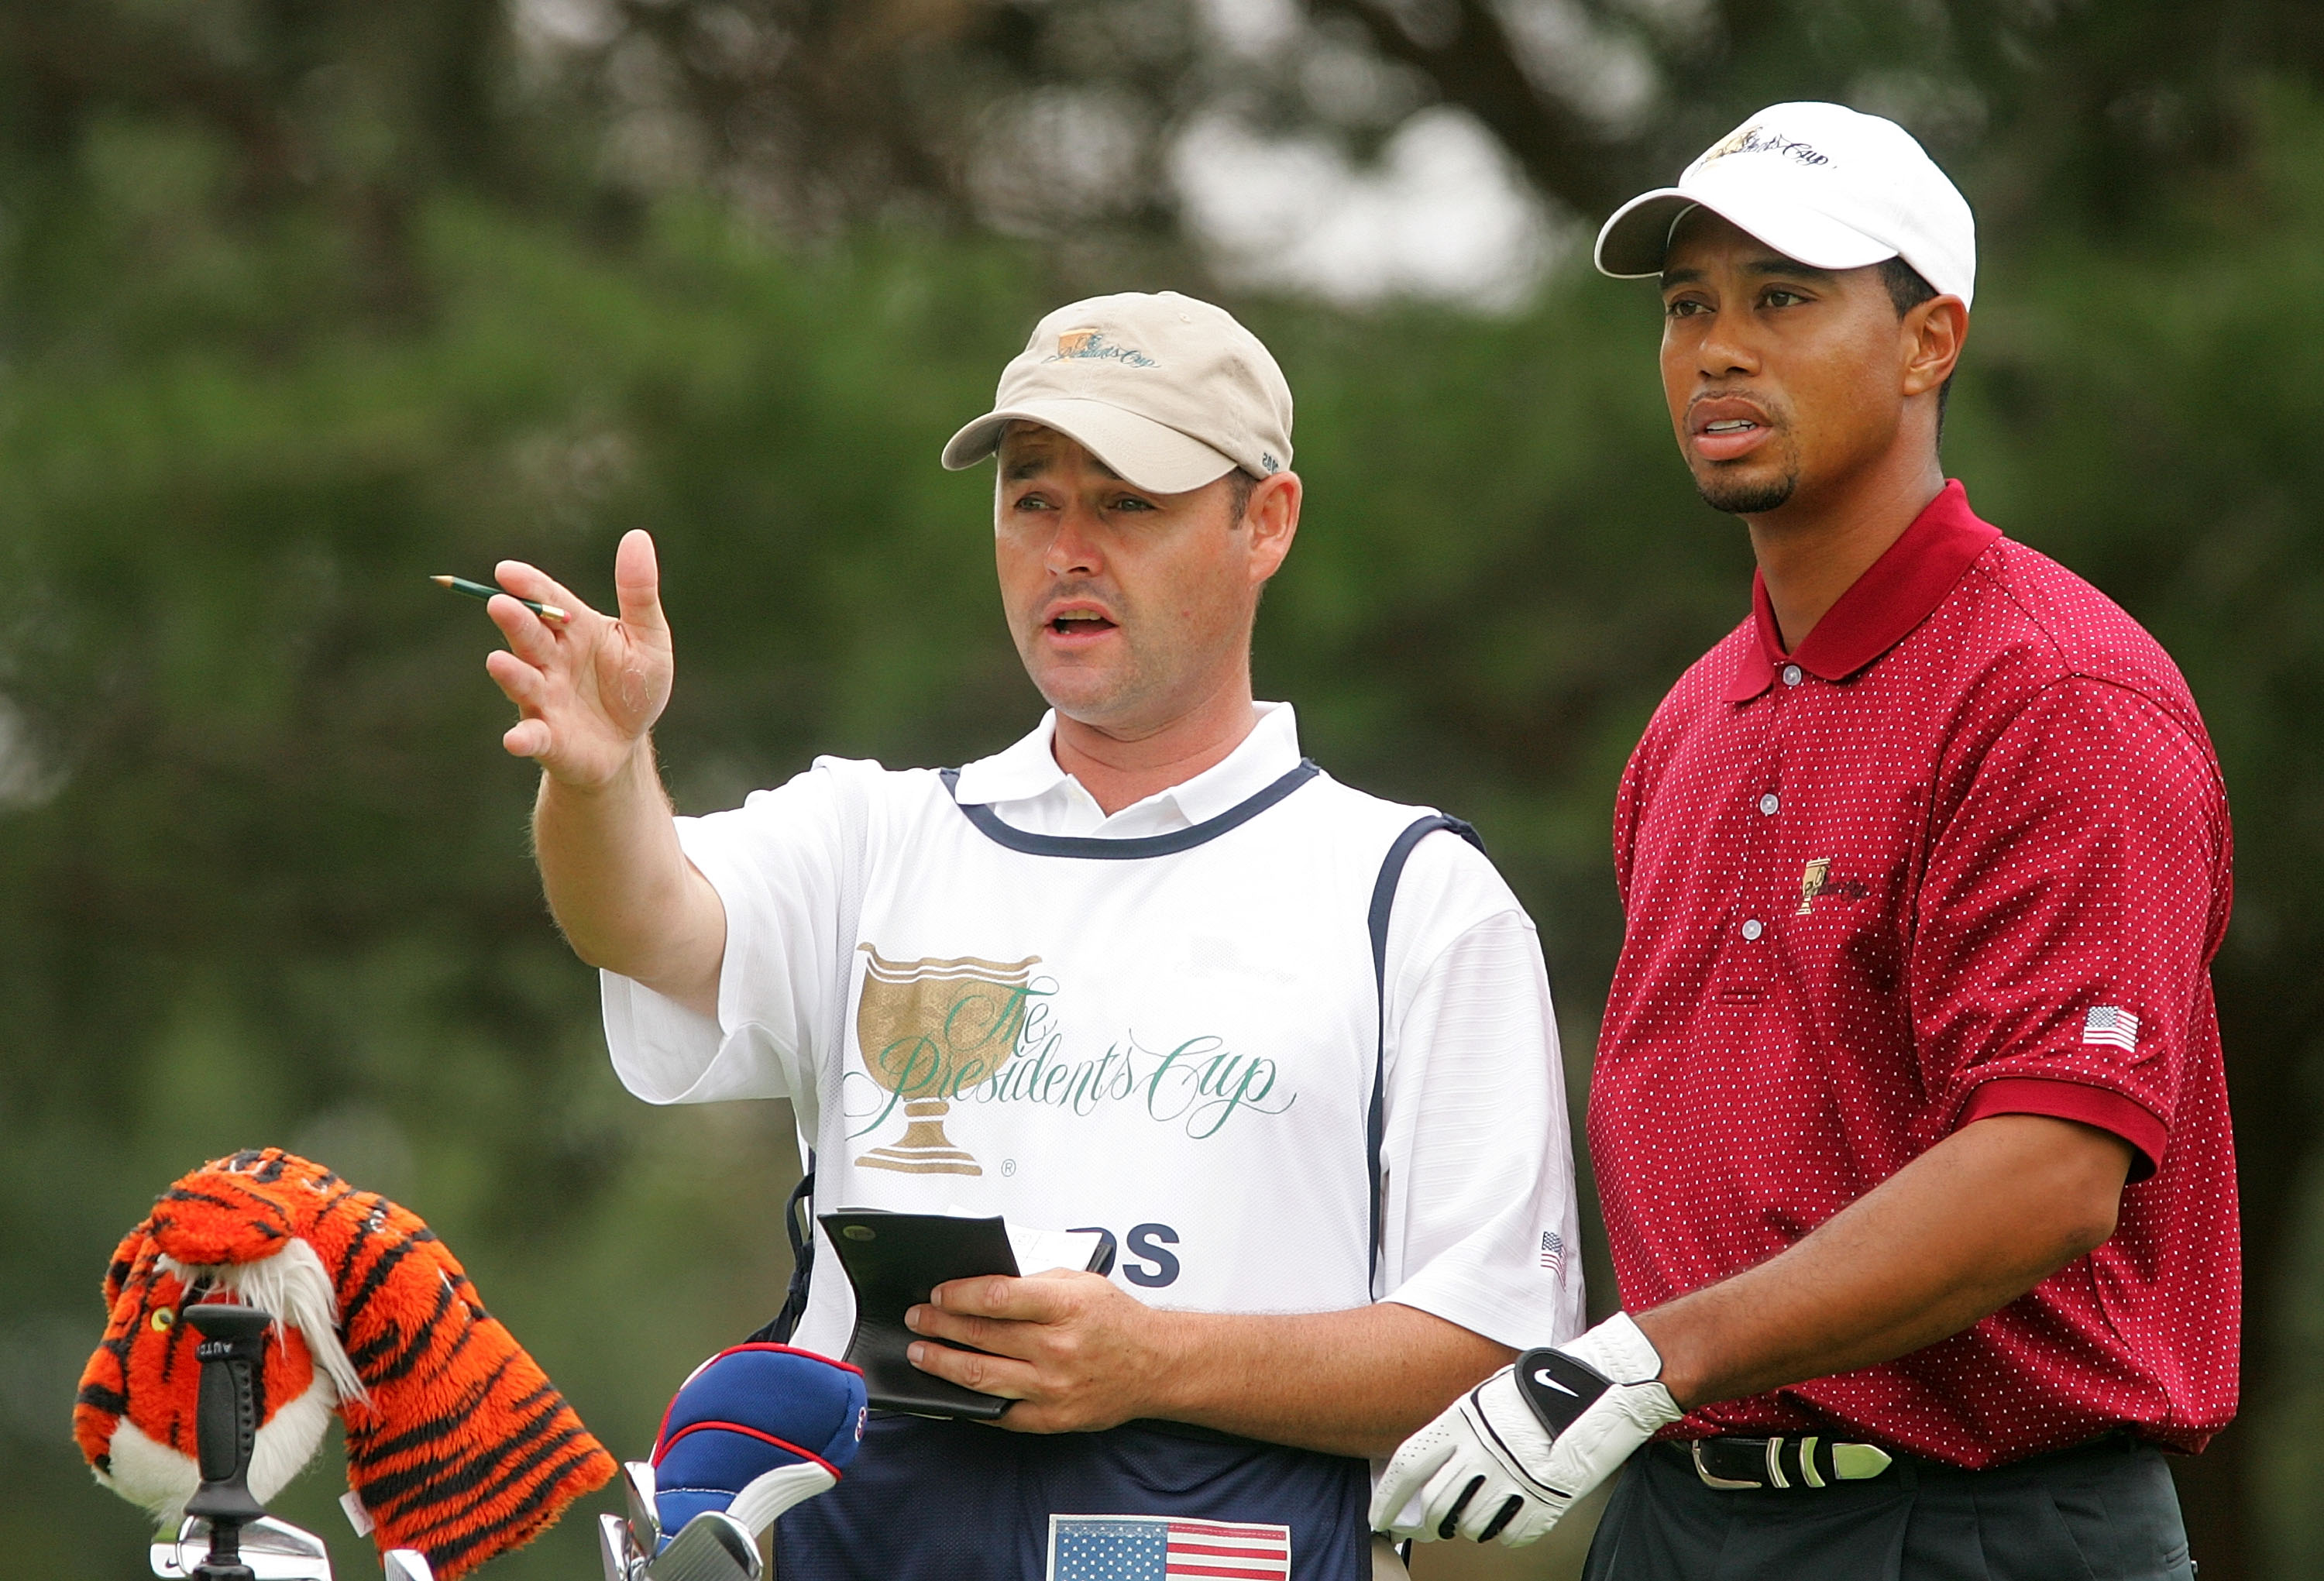 Foster caddied for Woods at the 2005 Presidents Cup (Photo: Getty Images)